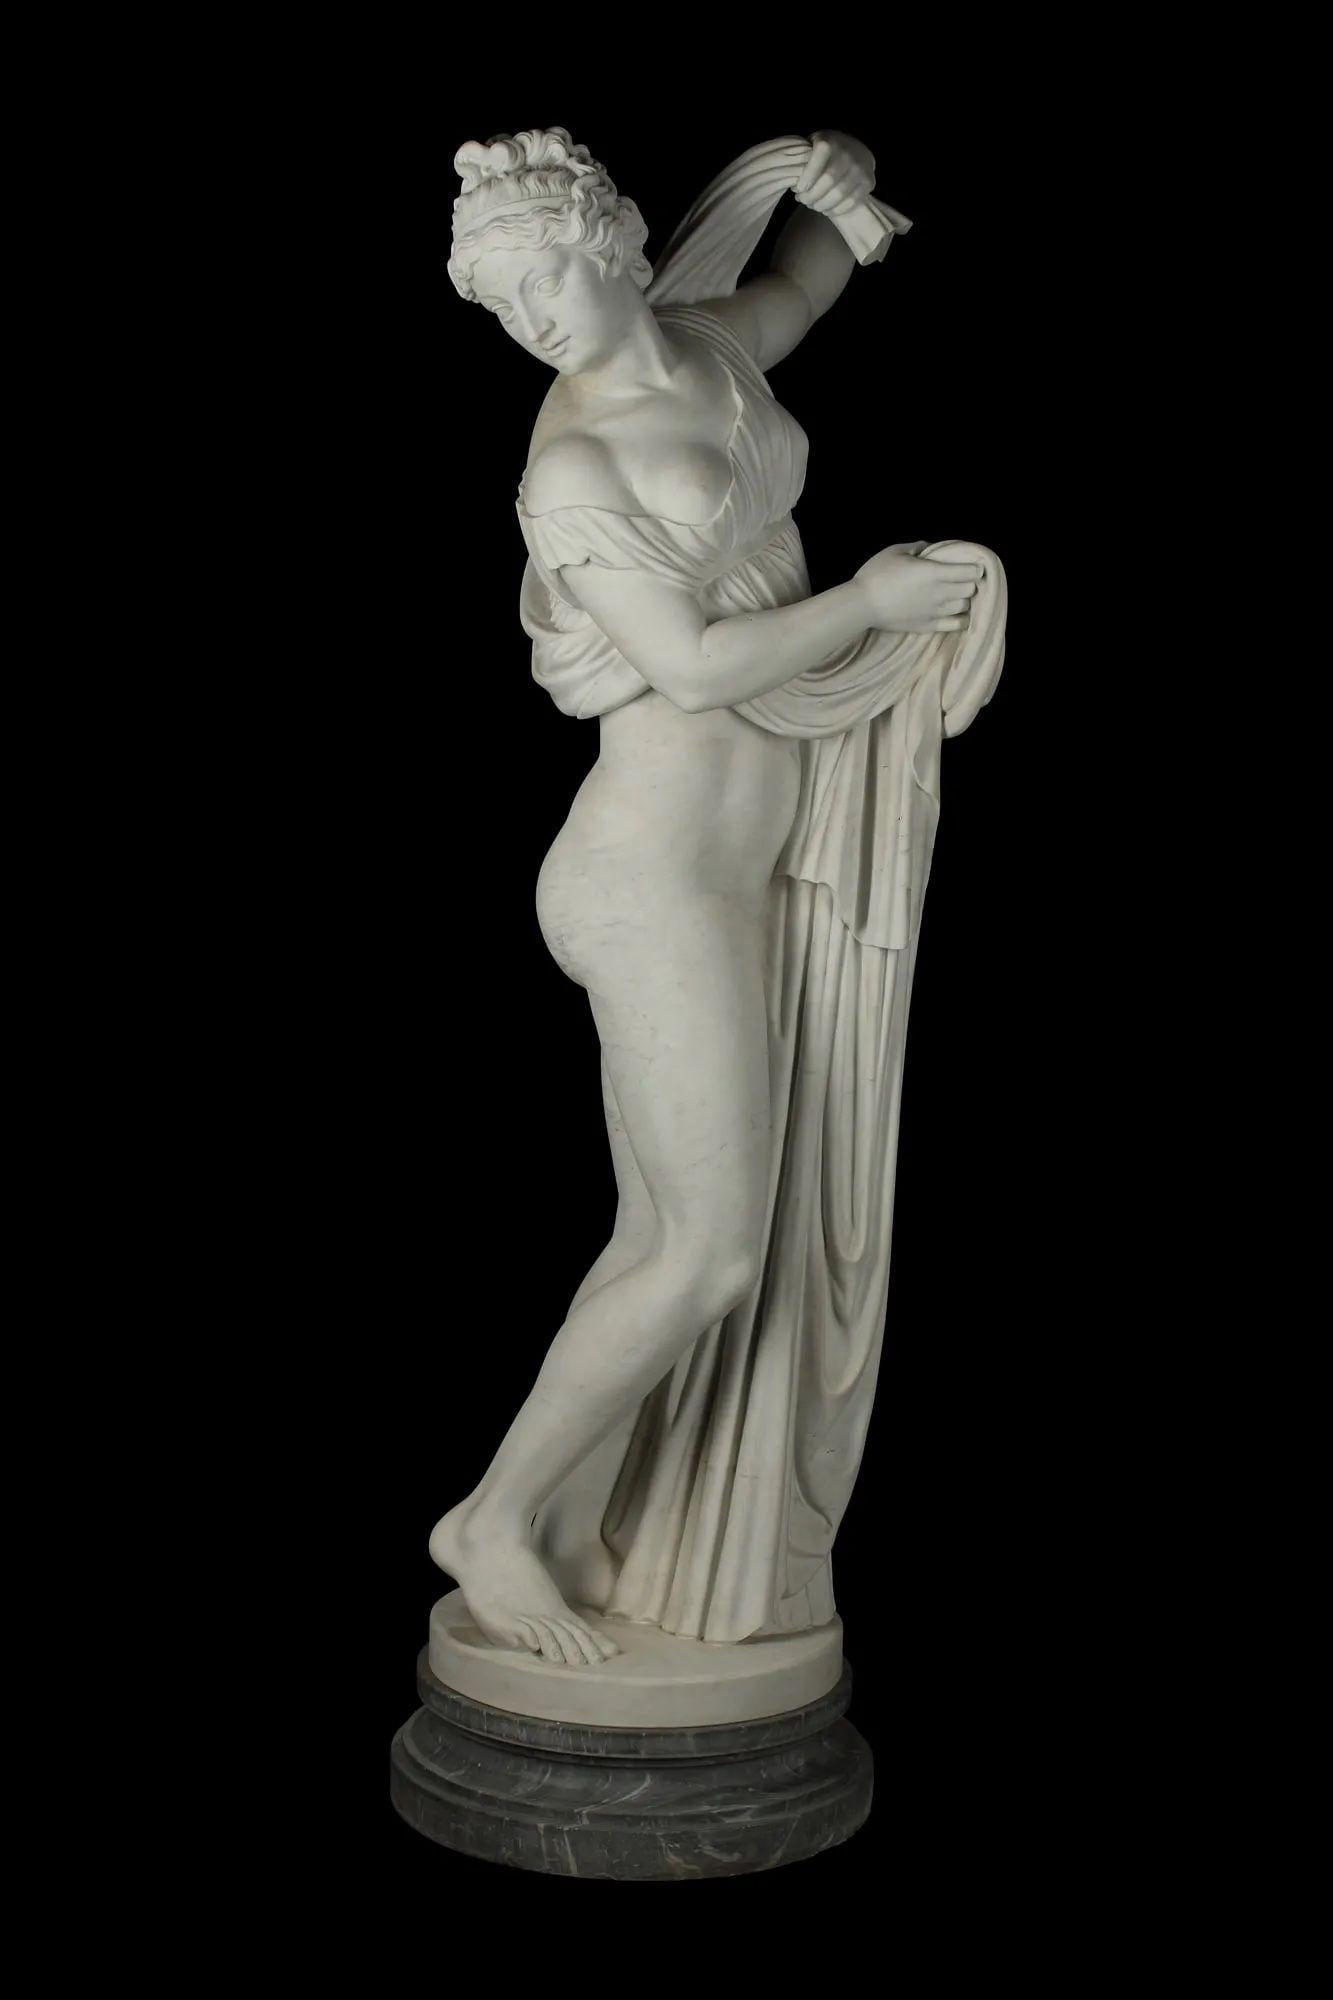 Traditional life-size marble figure depicting an alluring semi-nude woman holding a draped garment that appears to be a dress. Made in Italy in the Late 19th Century.
Dimensions:
72